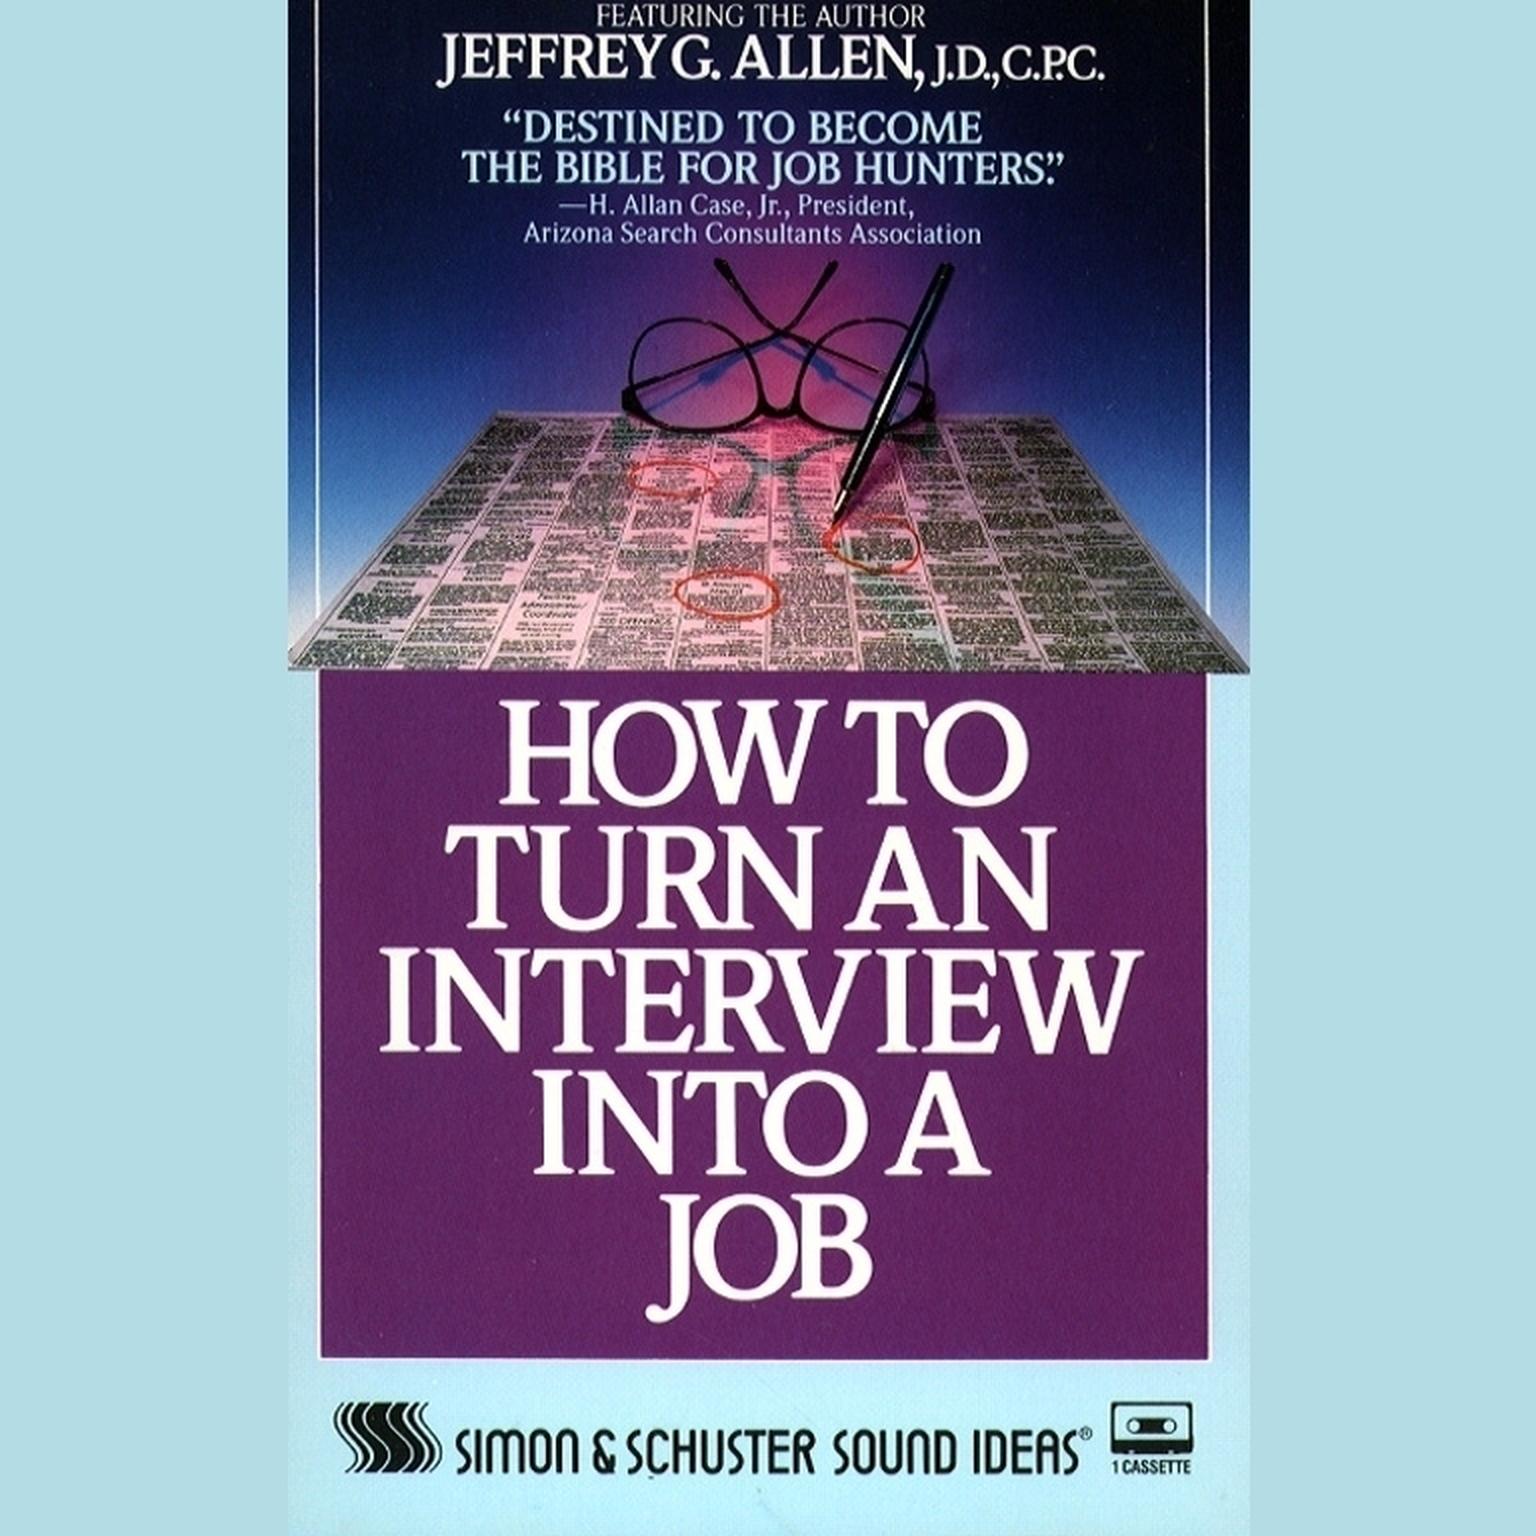 How to Turn An Interview Into A Job (Abridged) Audiobook, by Jeffrey G. Allen